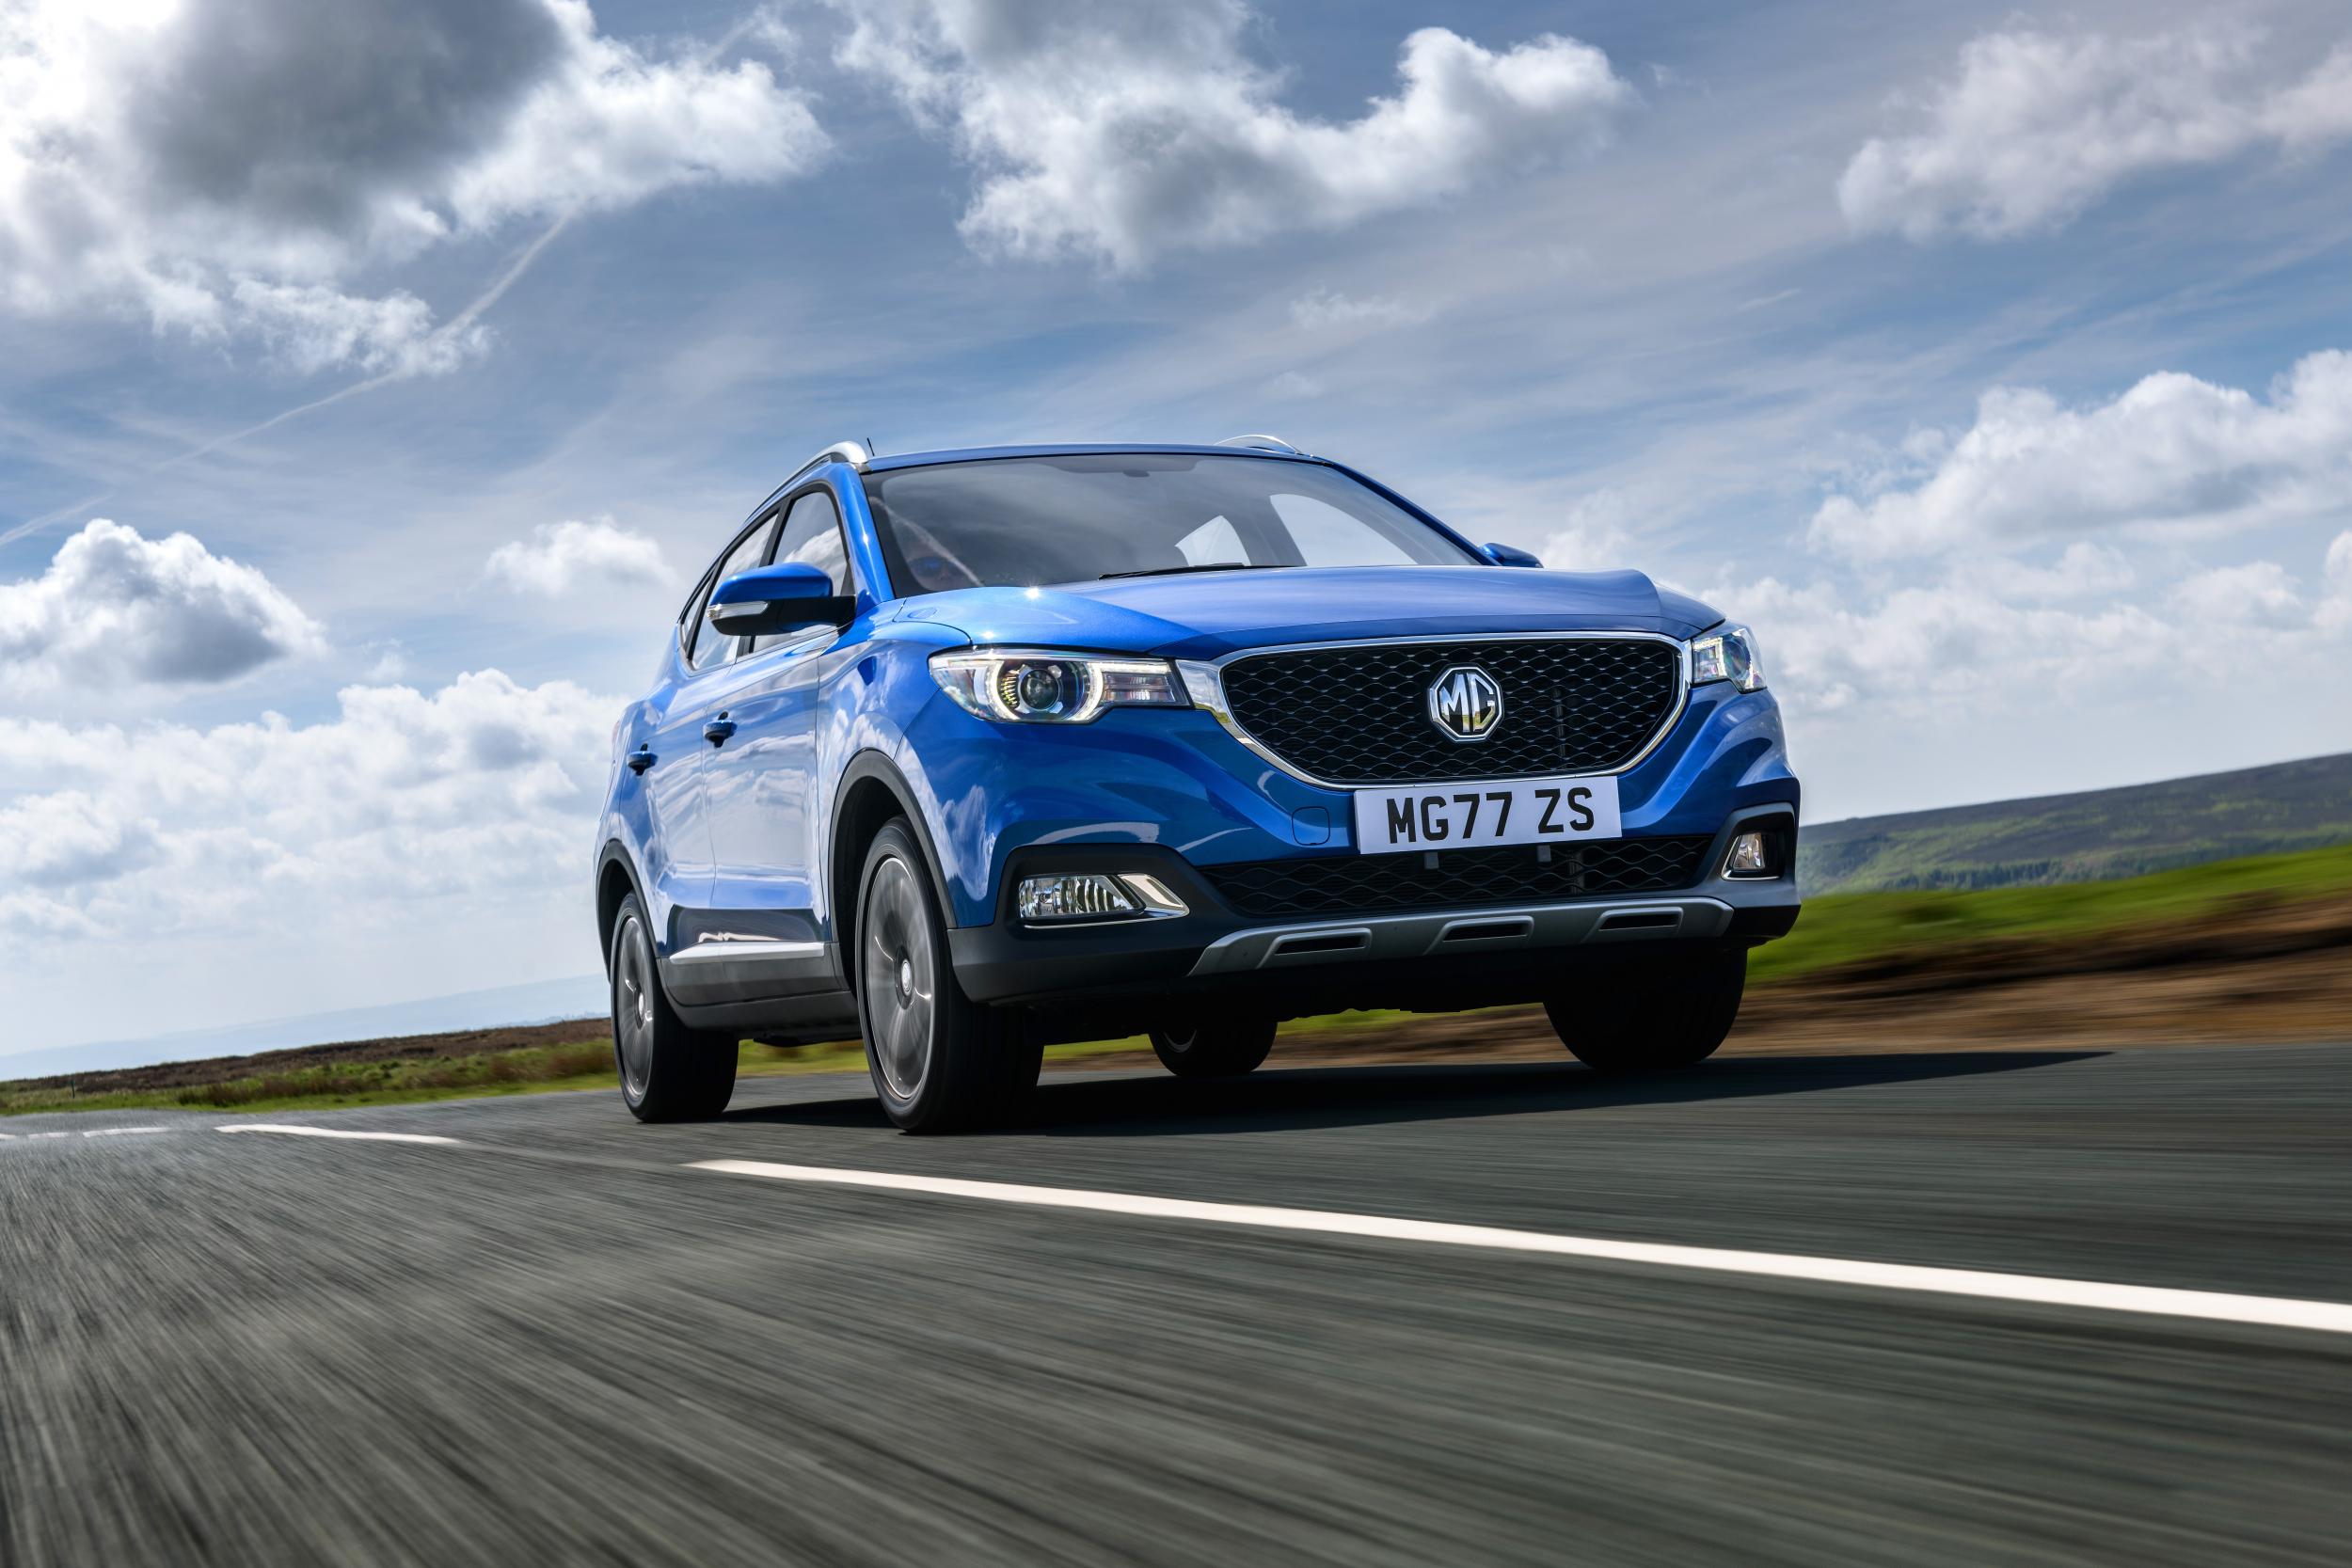 MG ZS review: A reasonably priced, compact SUV – but a bit generic